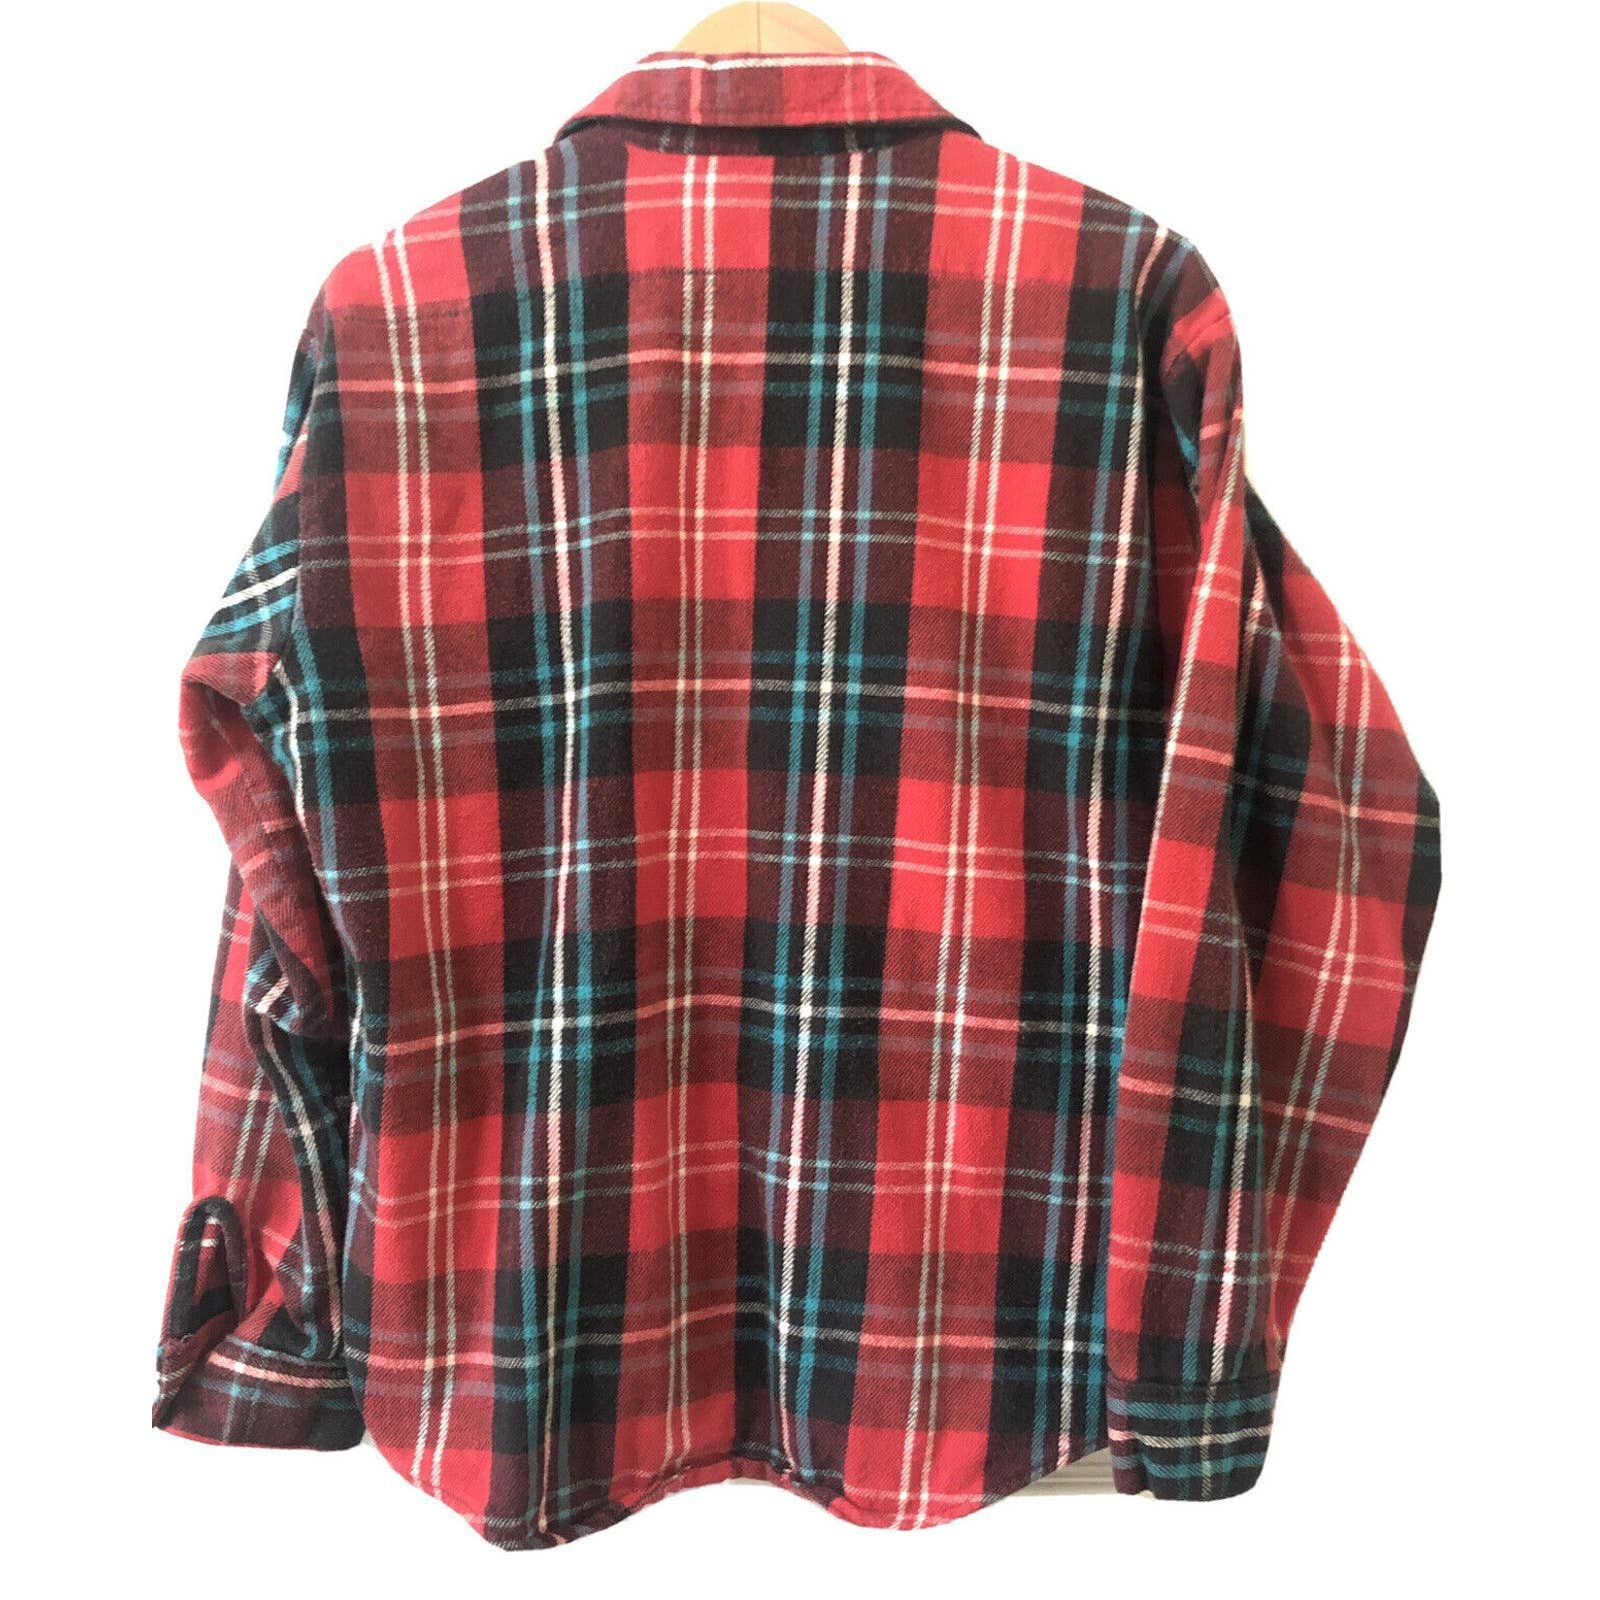 Field And Stream Vintage Field & Stream L Heavy Flannel Red Plaid Made USA Size US L / EU 52-54 / 3 - 7 Preview